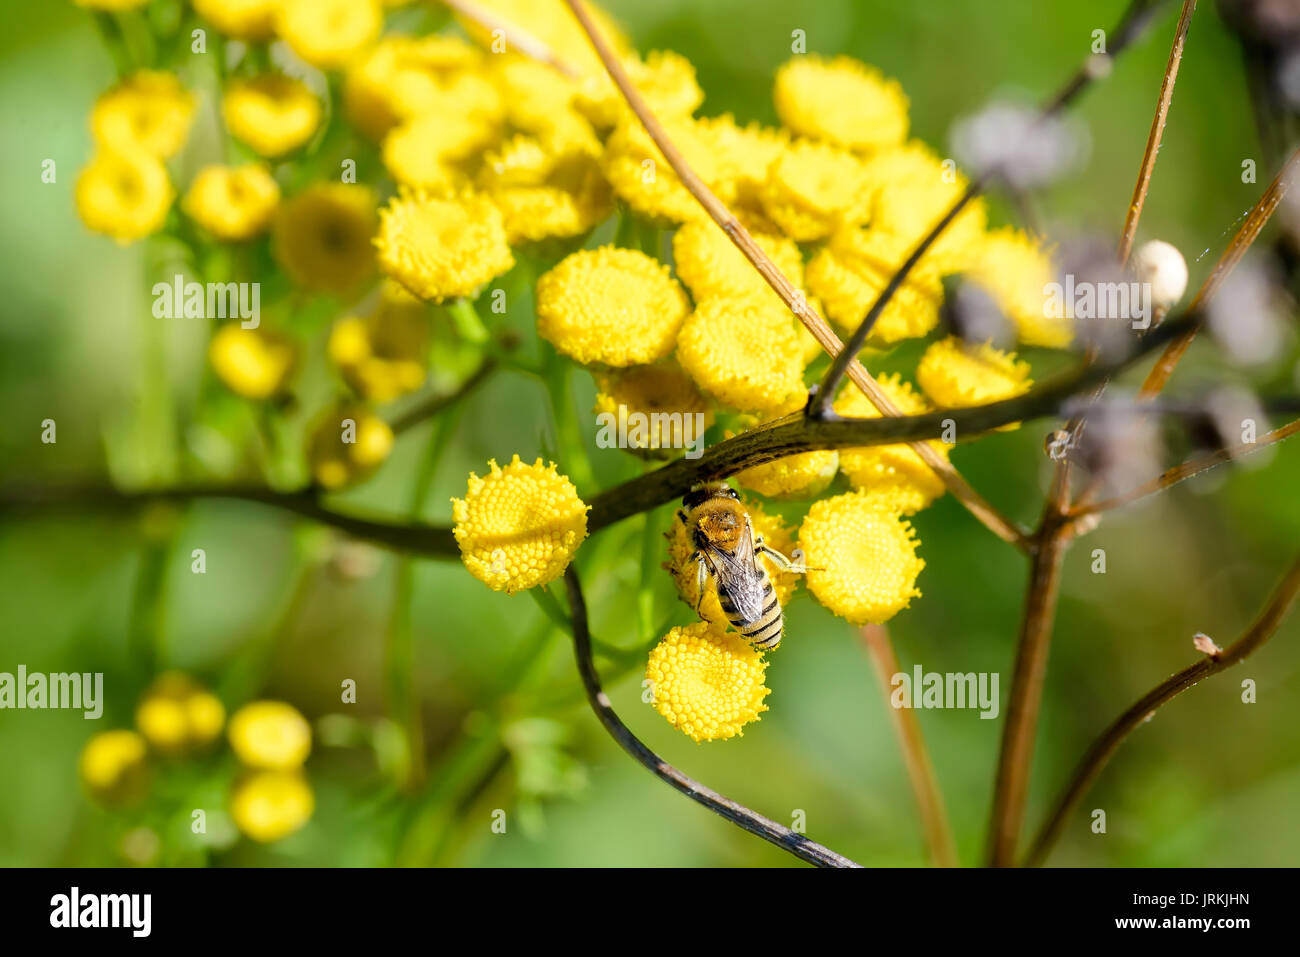 A Colletes simulans also known as plasterer bee or or polyester bee, foraging on a yellow Tansy flower (Tanacetum vulgare), under the warm summer sun. Stock Photo